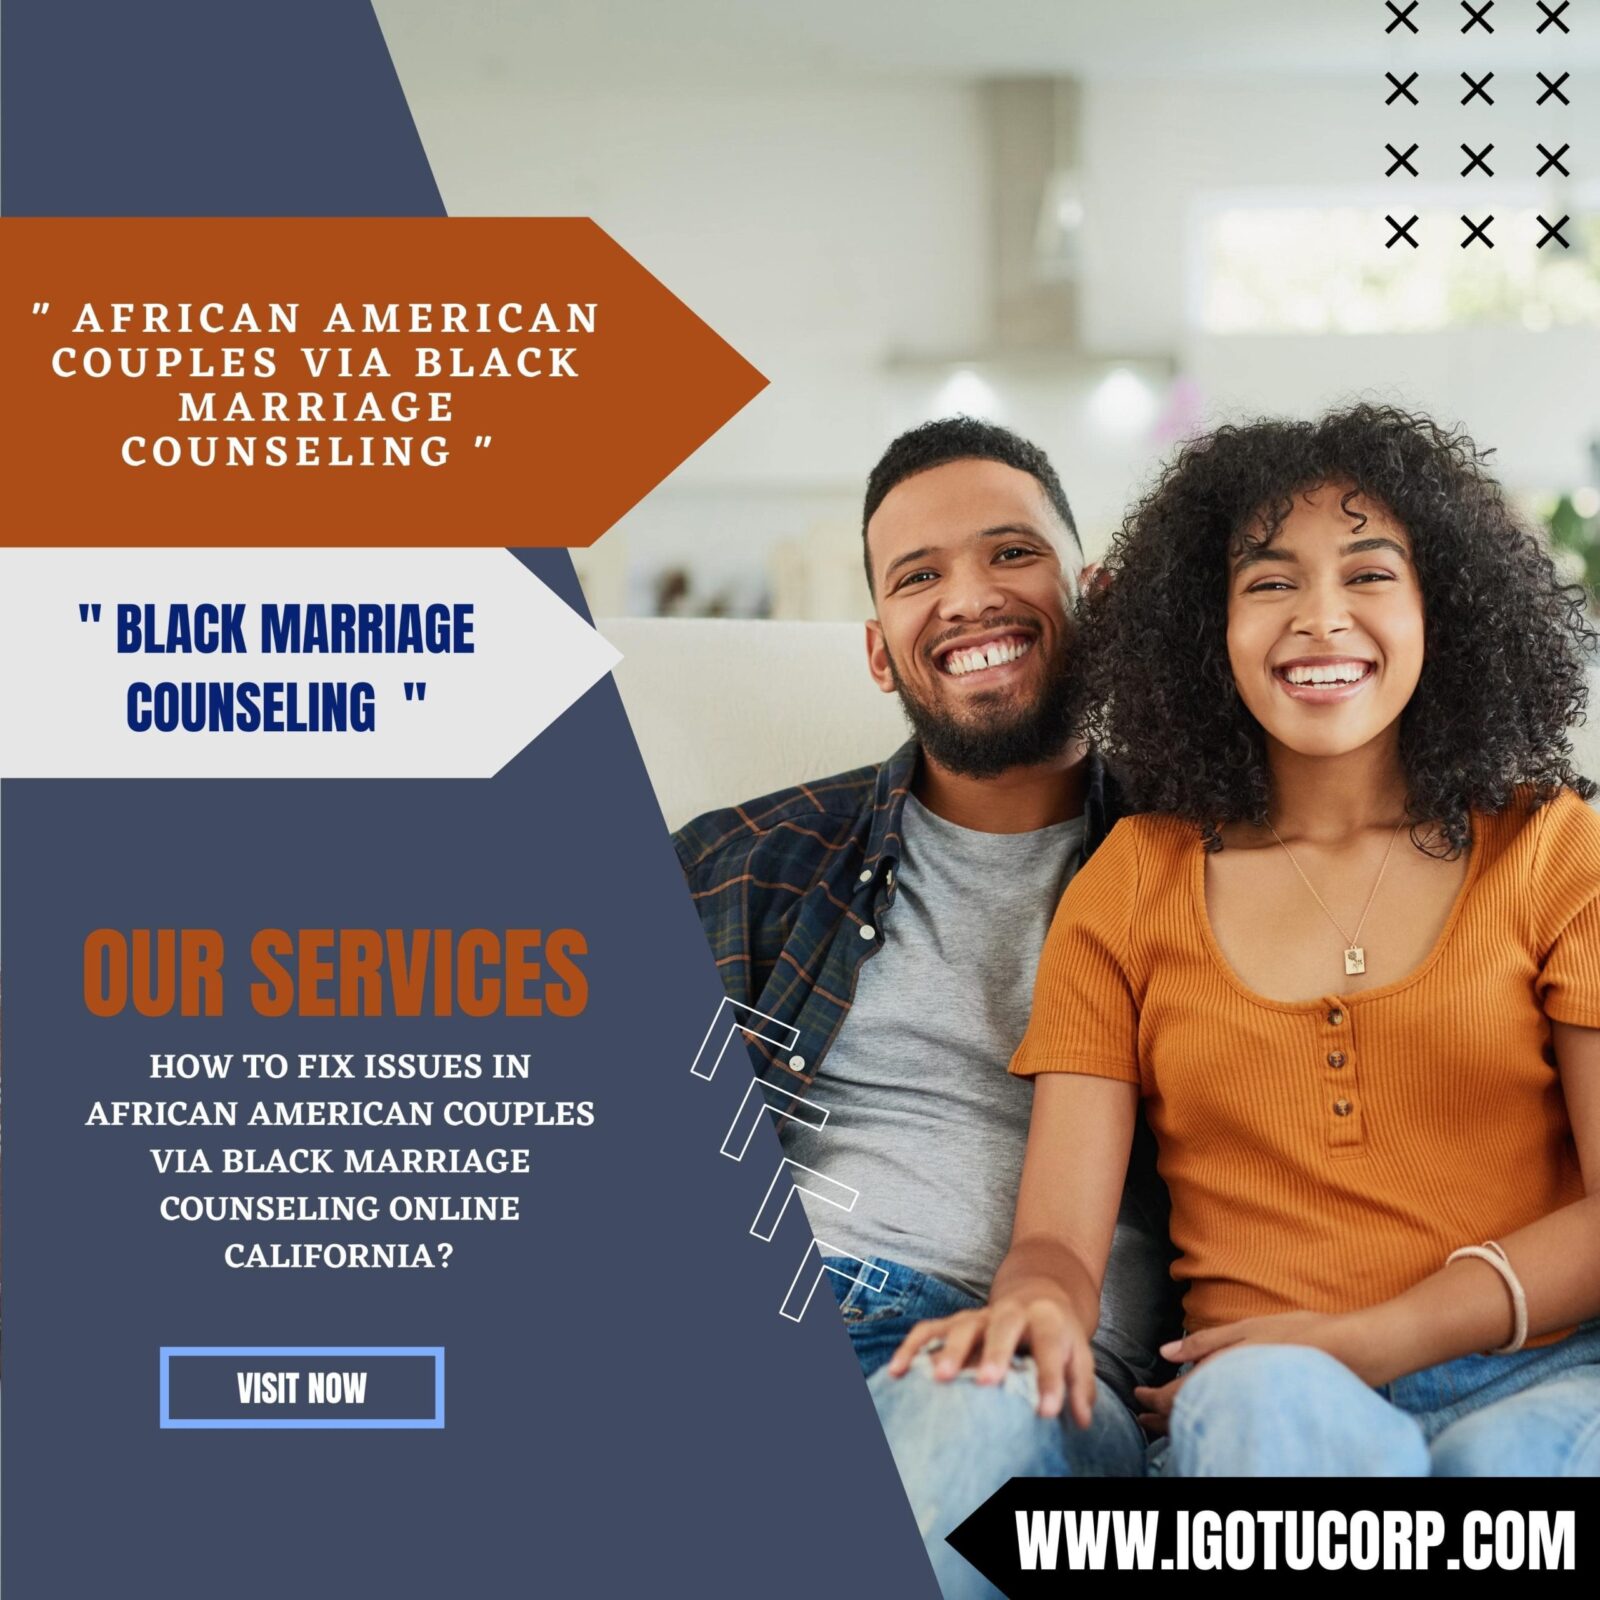 Black Marriage Counseling Online California